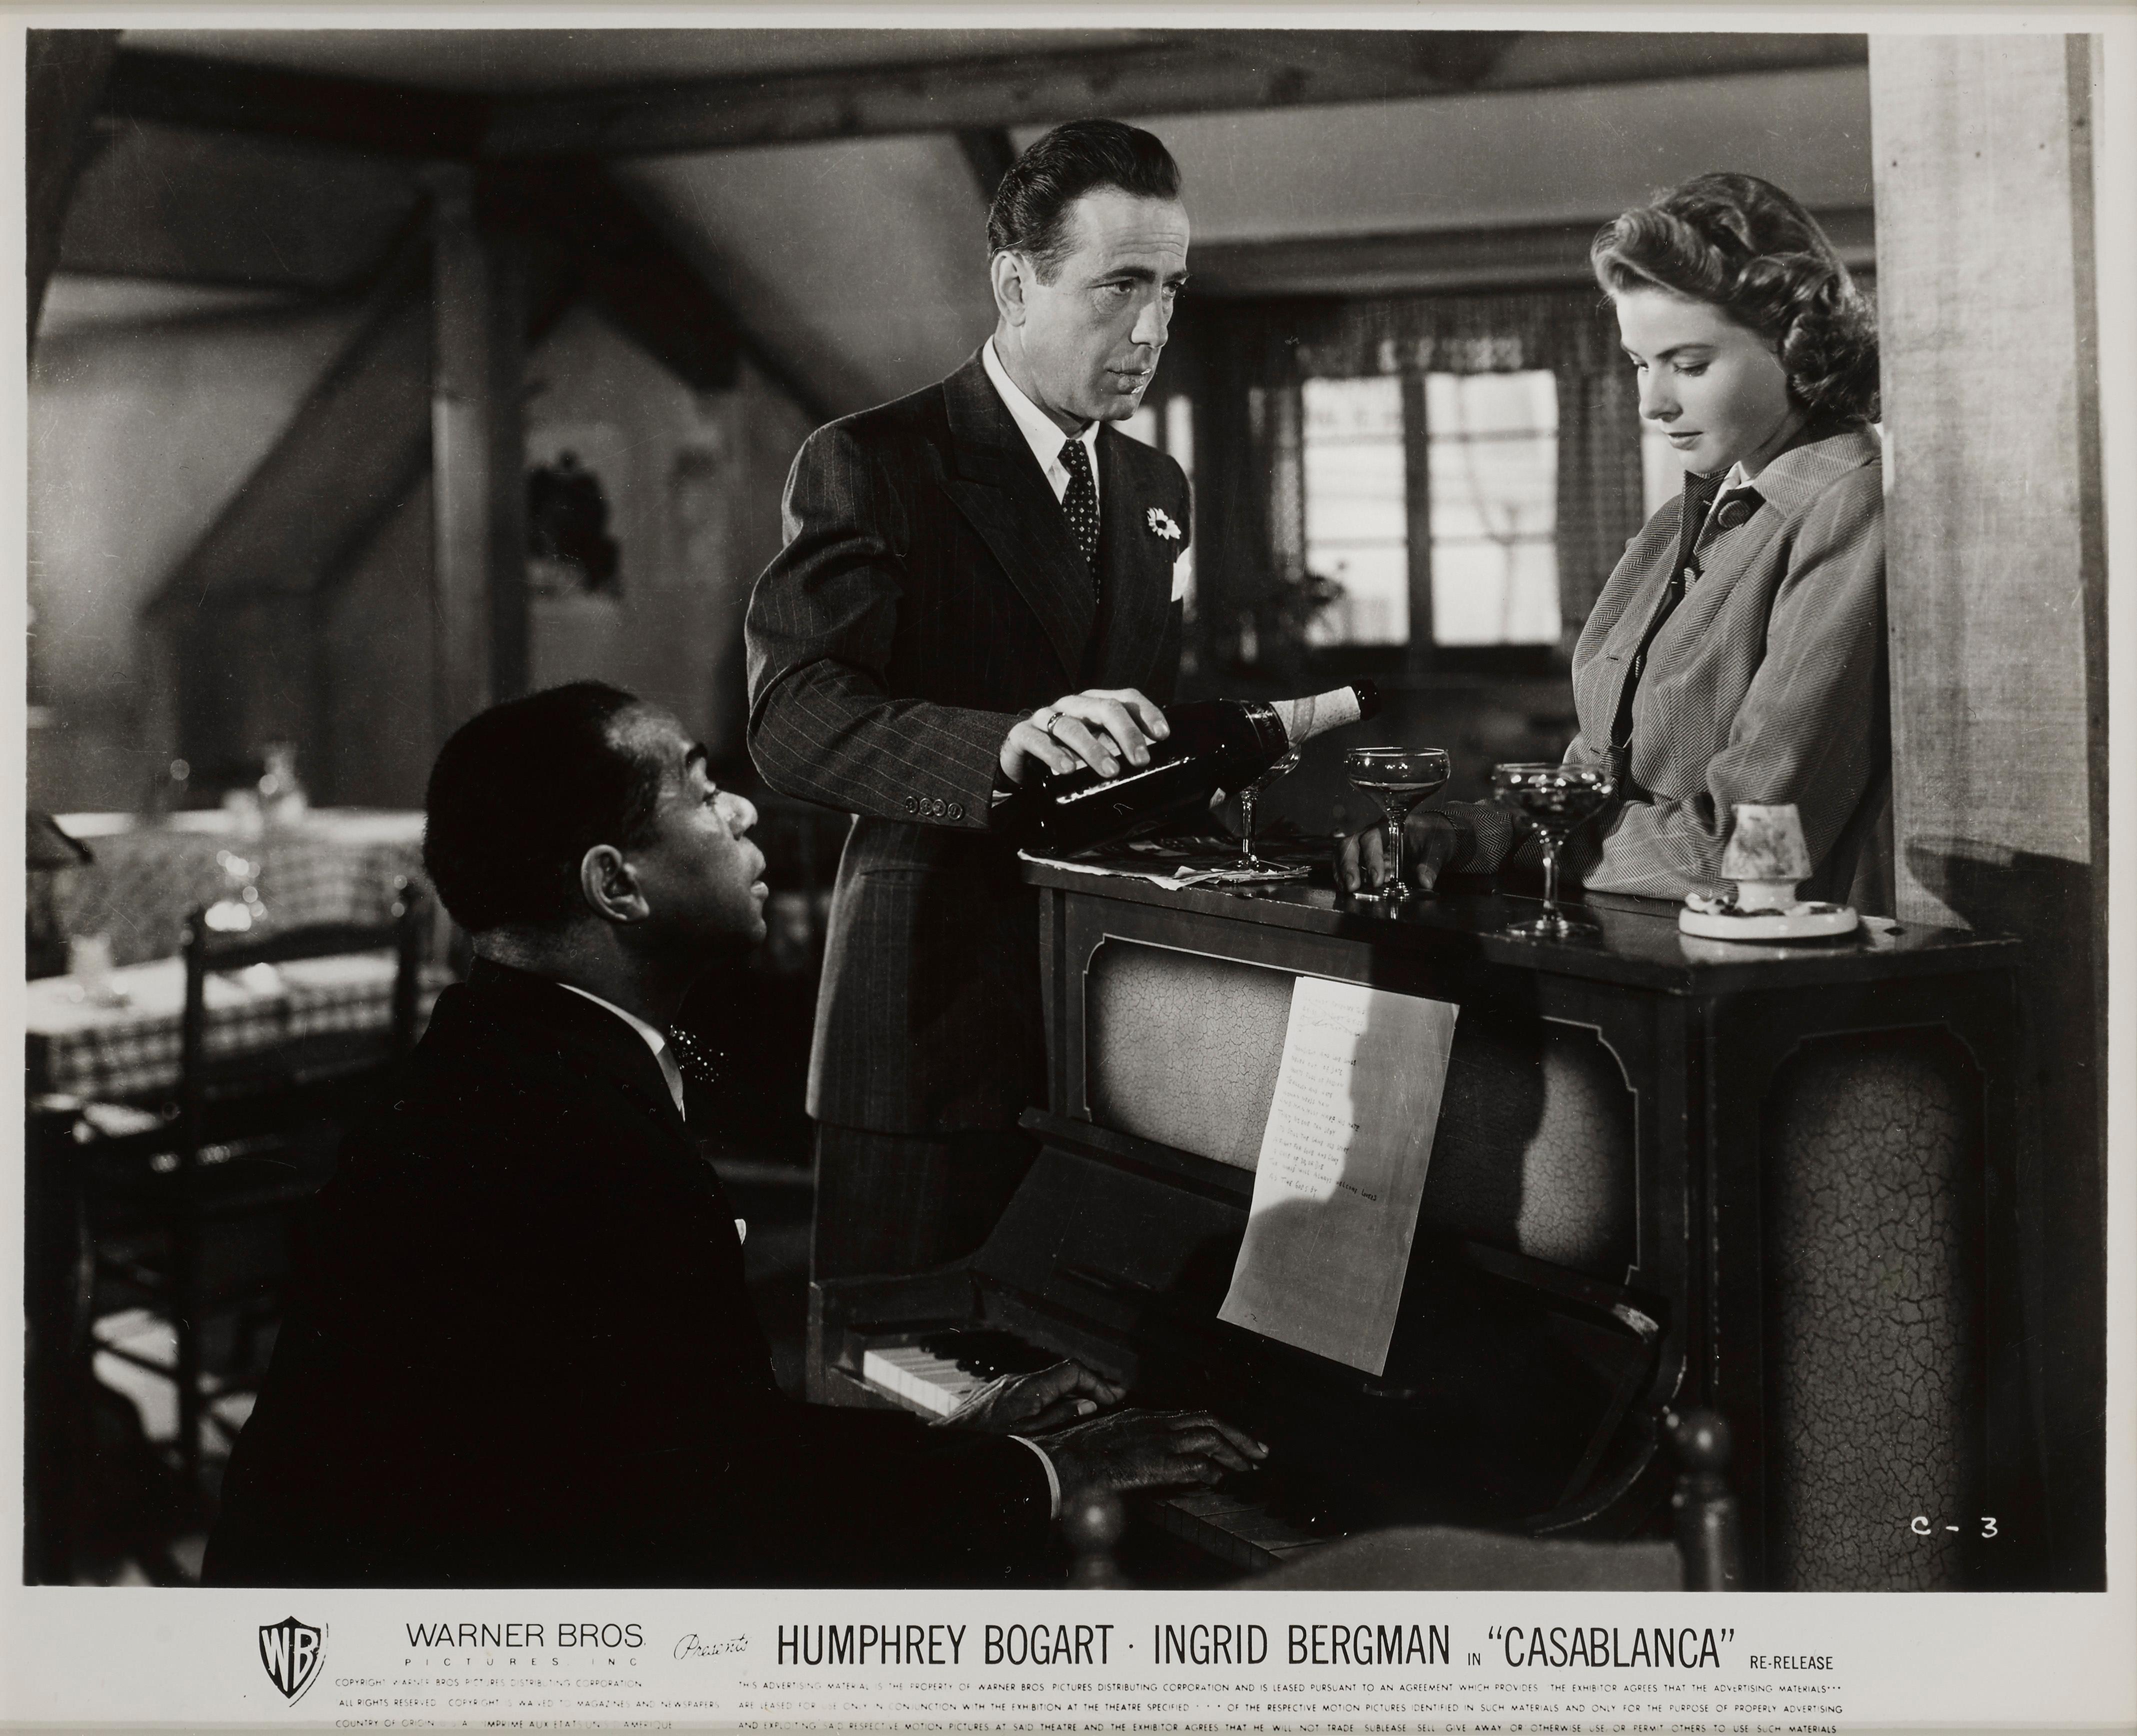 Original US black and white photographic production still used for the 1960 re-release of the film in America.
The film staring Humphrey Bogart, Ingrid Bergman and Paul Henreid. The film remains one of the most famous of all time. The piece is